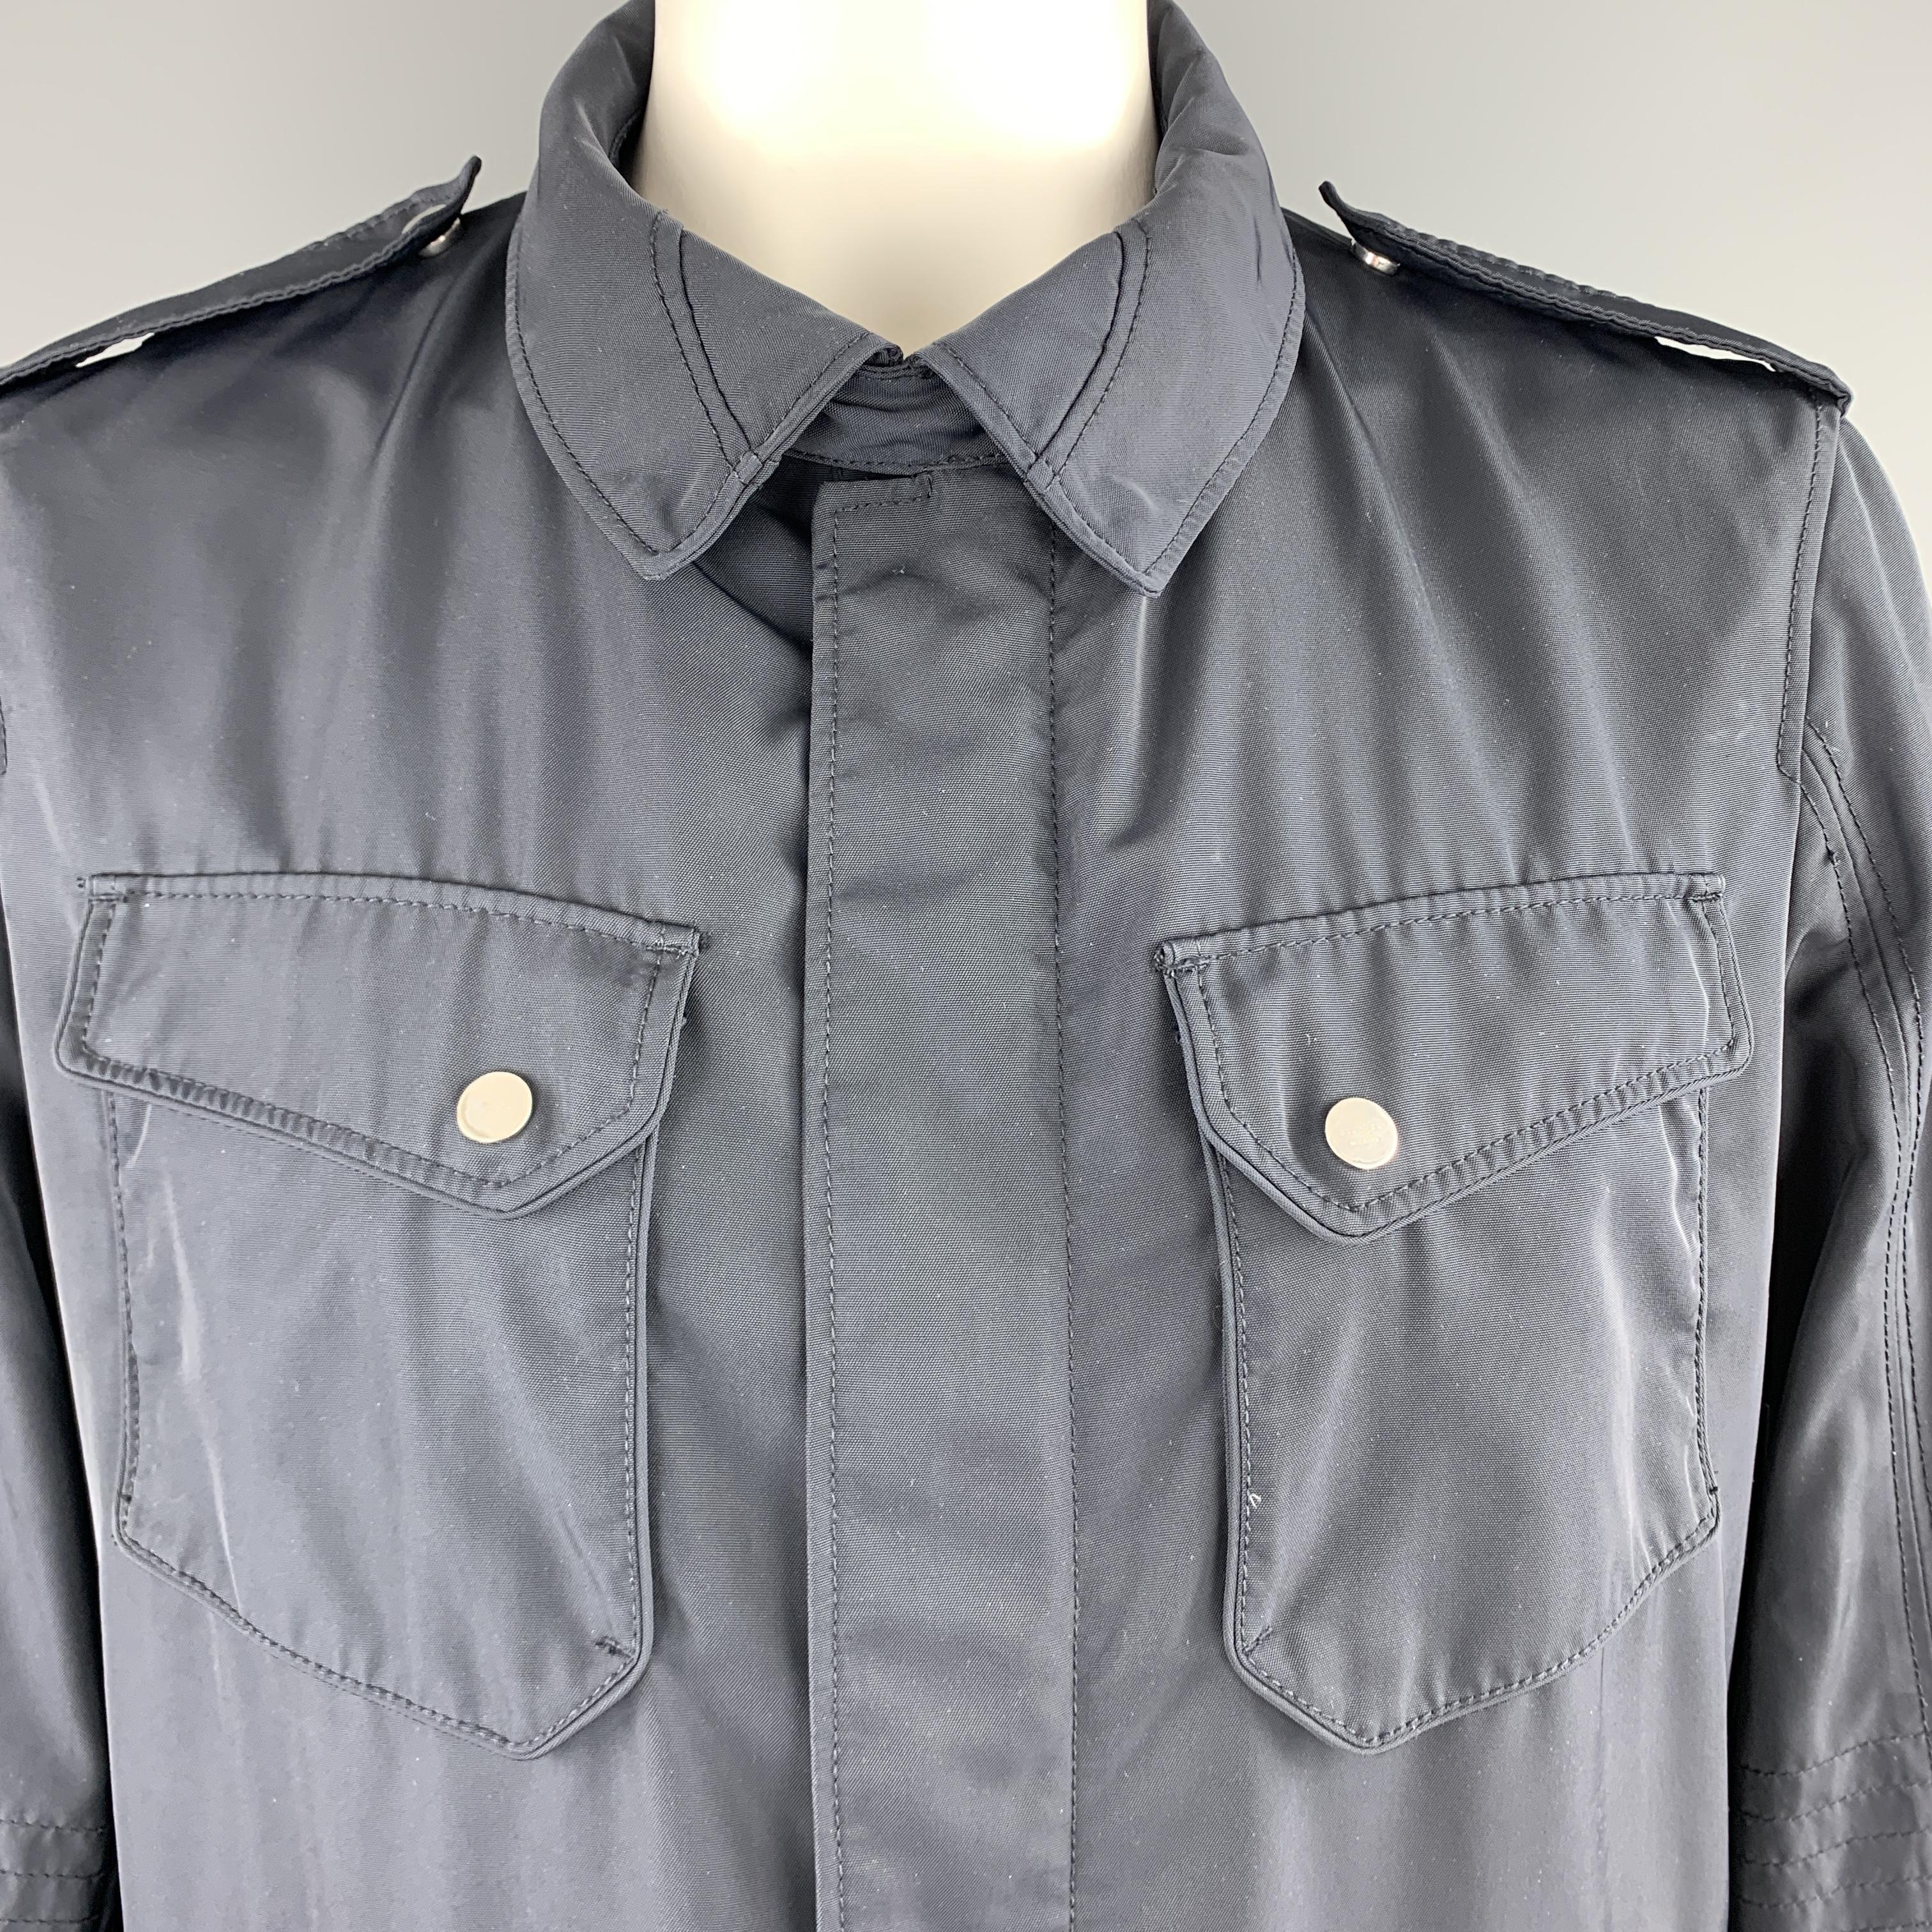 ALLEGRI jacket comes in navy waterproof twill with a pointed snap tab collar, zip closure with snap pocket, and patch flap pockets. Wear throughout. As-is. 

Good Pre-Owned Condition.
Marked: XL

Measurements:

Shoulder: 18 in.
Chest: 46 in.
Sleeve: